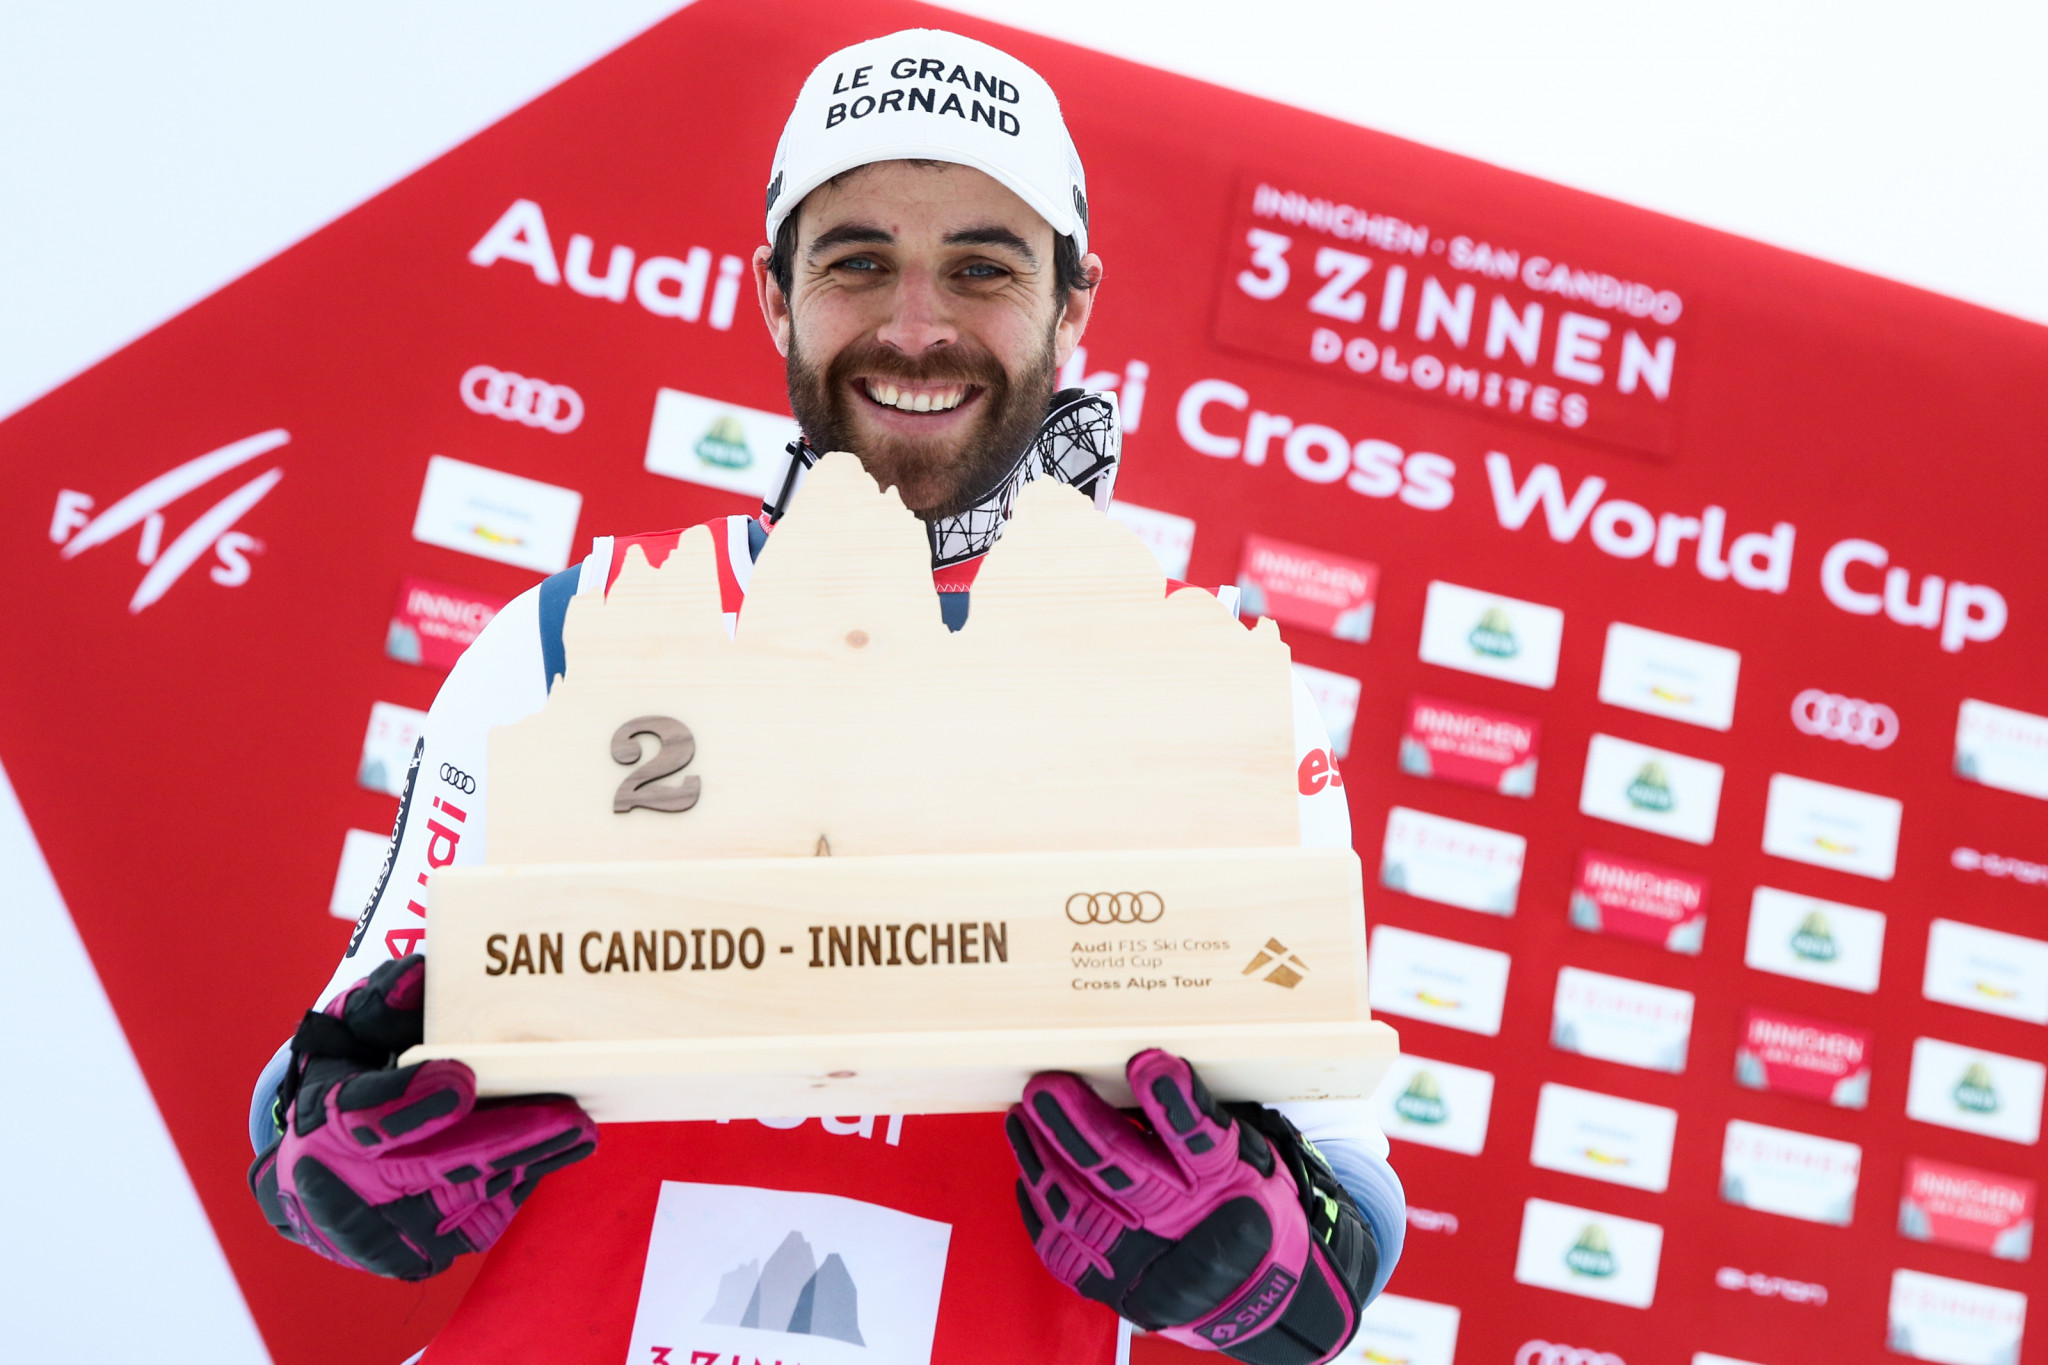 Innichen/San Candido has hosted a Ski Cross World Cup every year since 2009 ©Getty Images